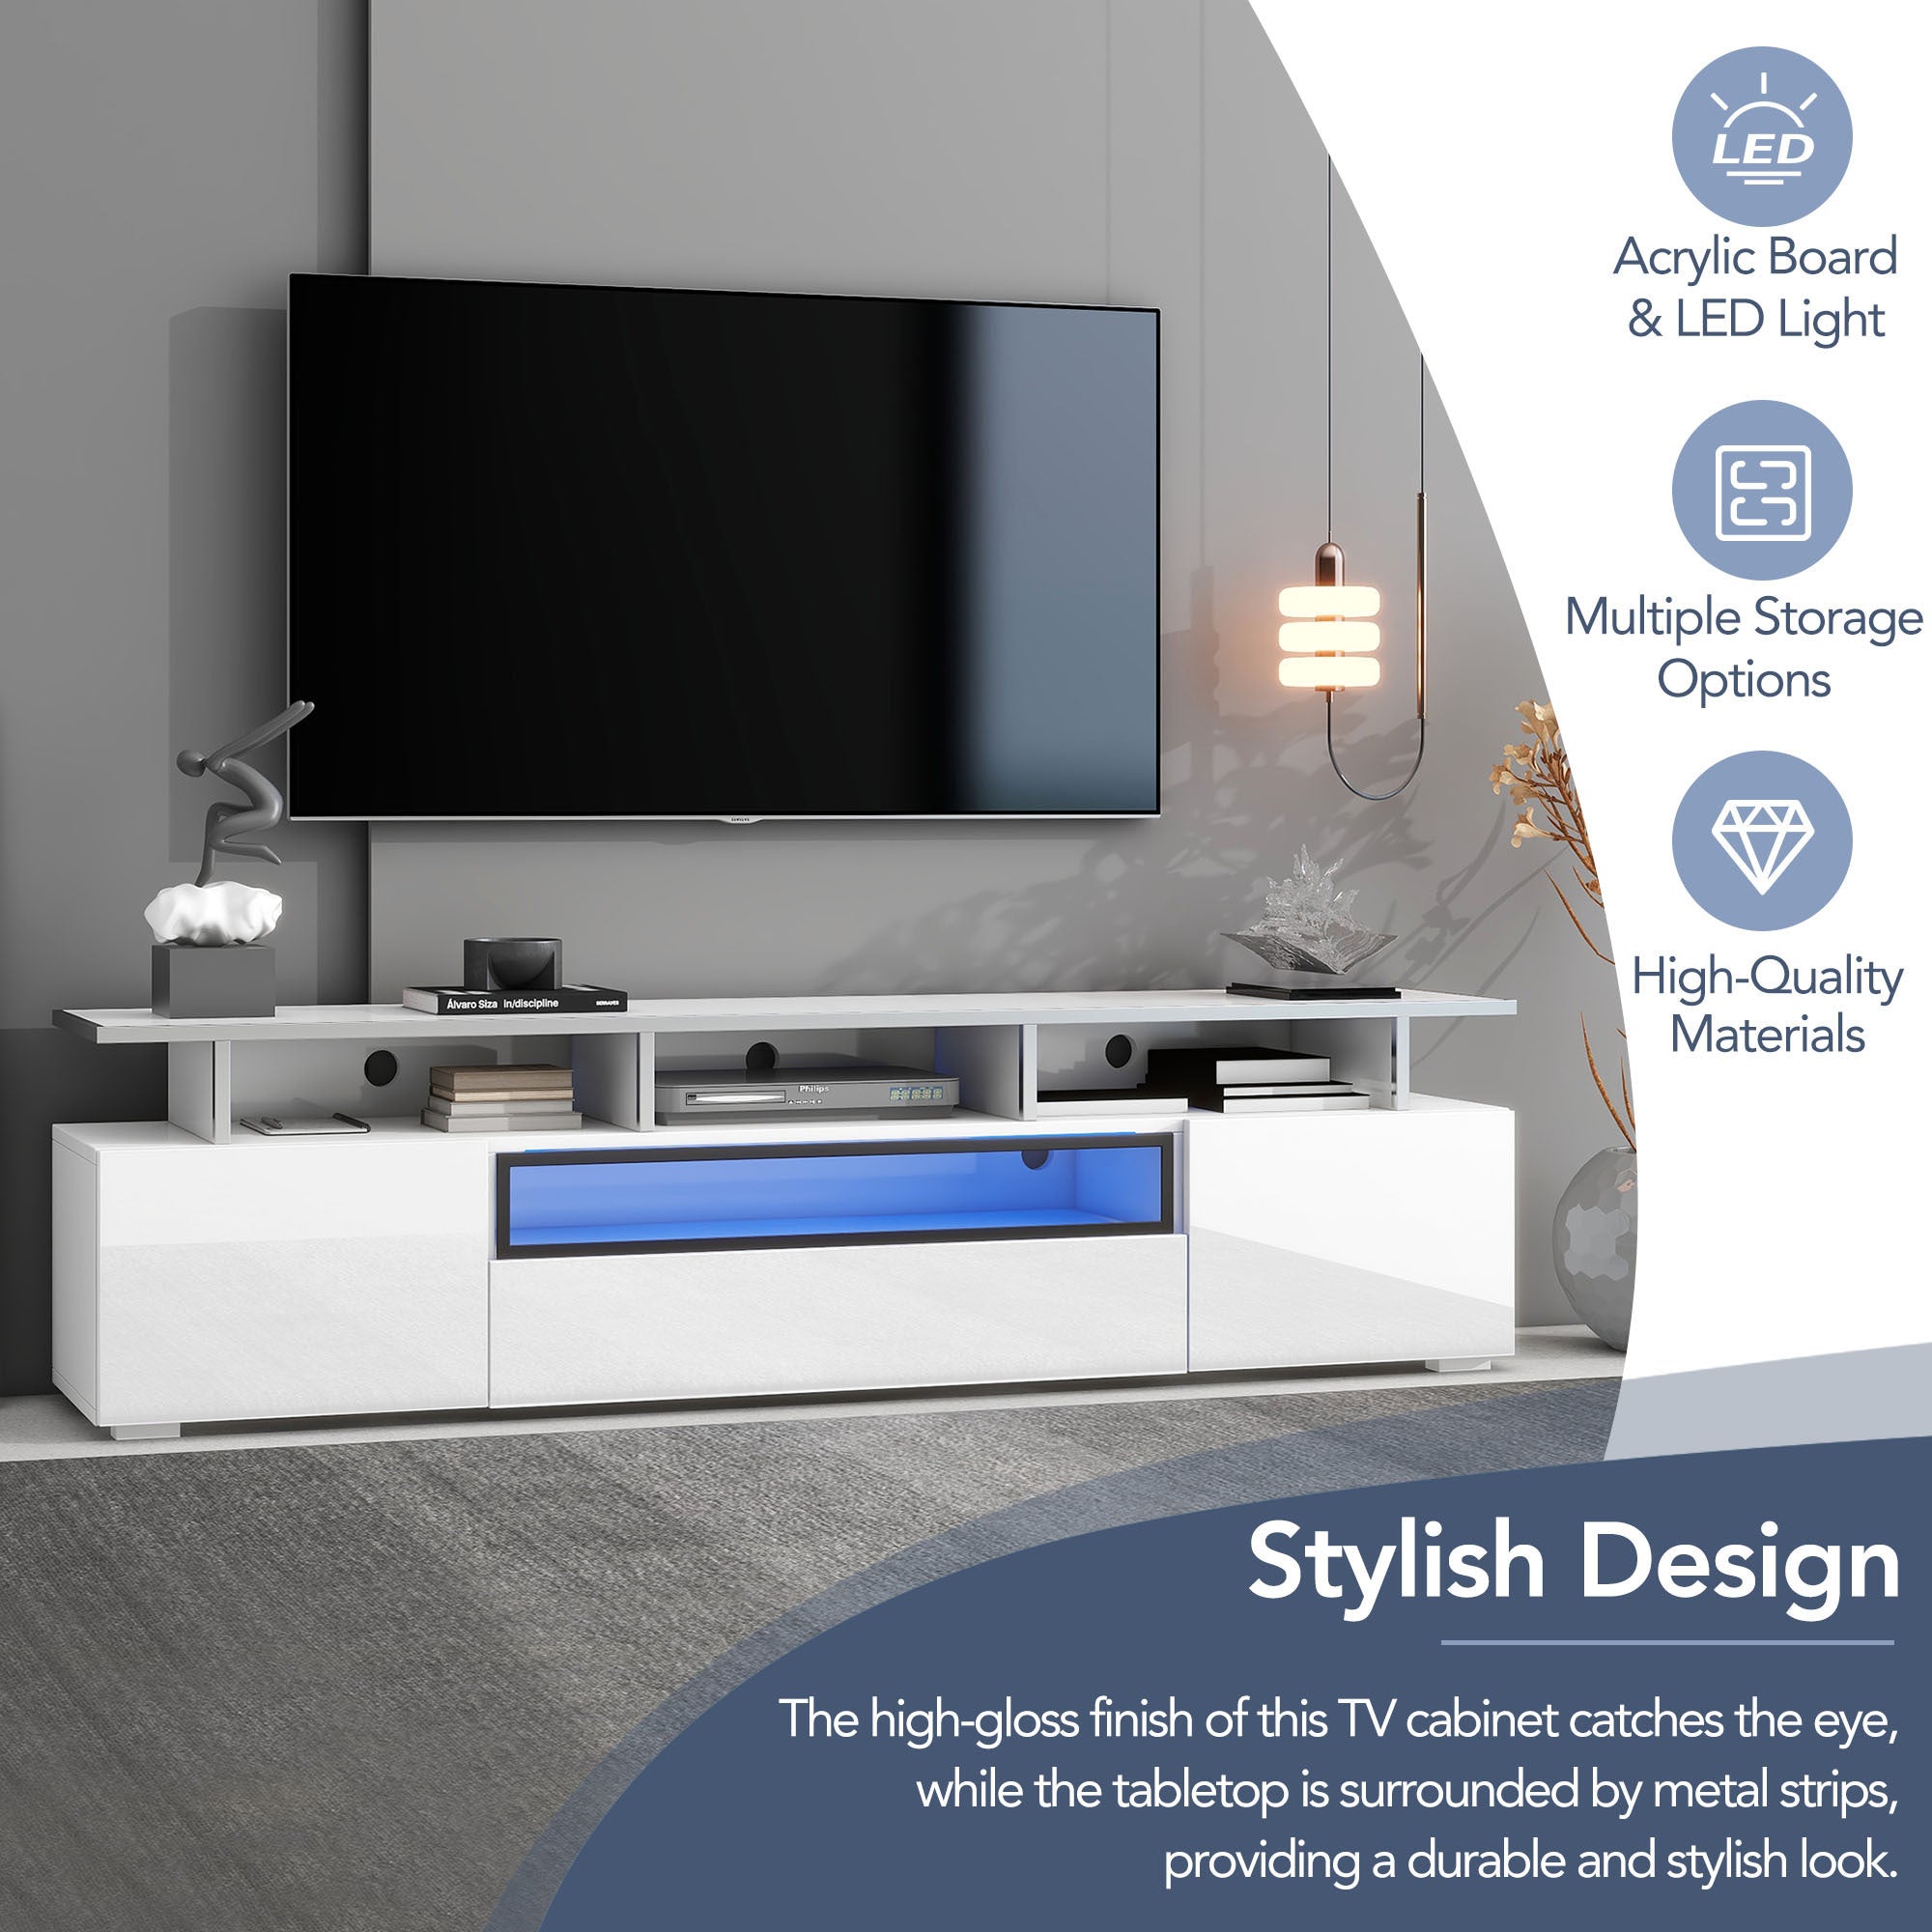 76.70" White Glossy Modern TV Stand with LED Light Fits TV up to 85"